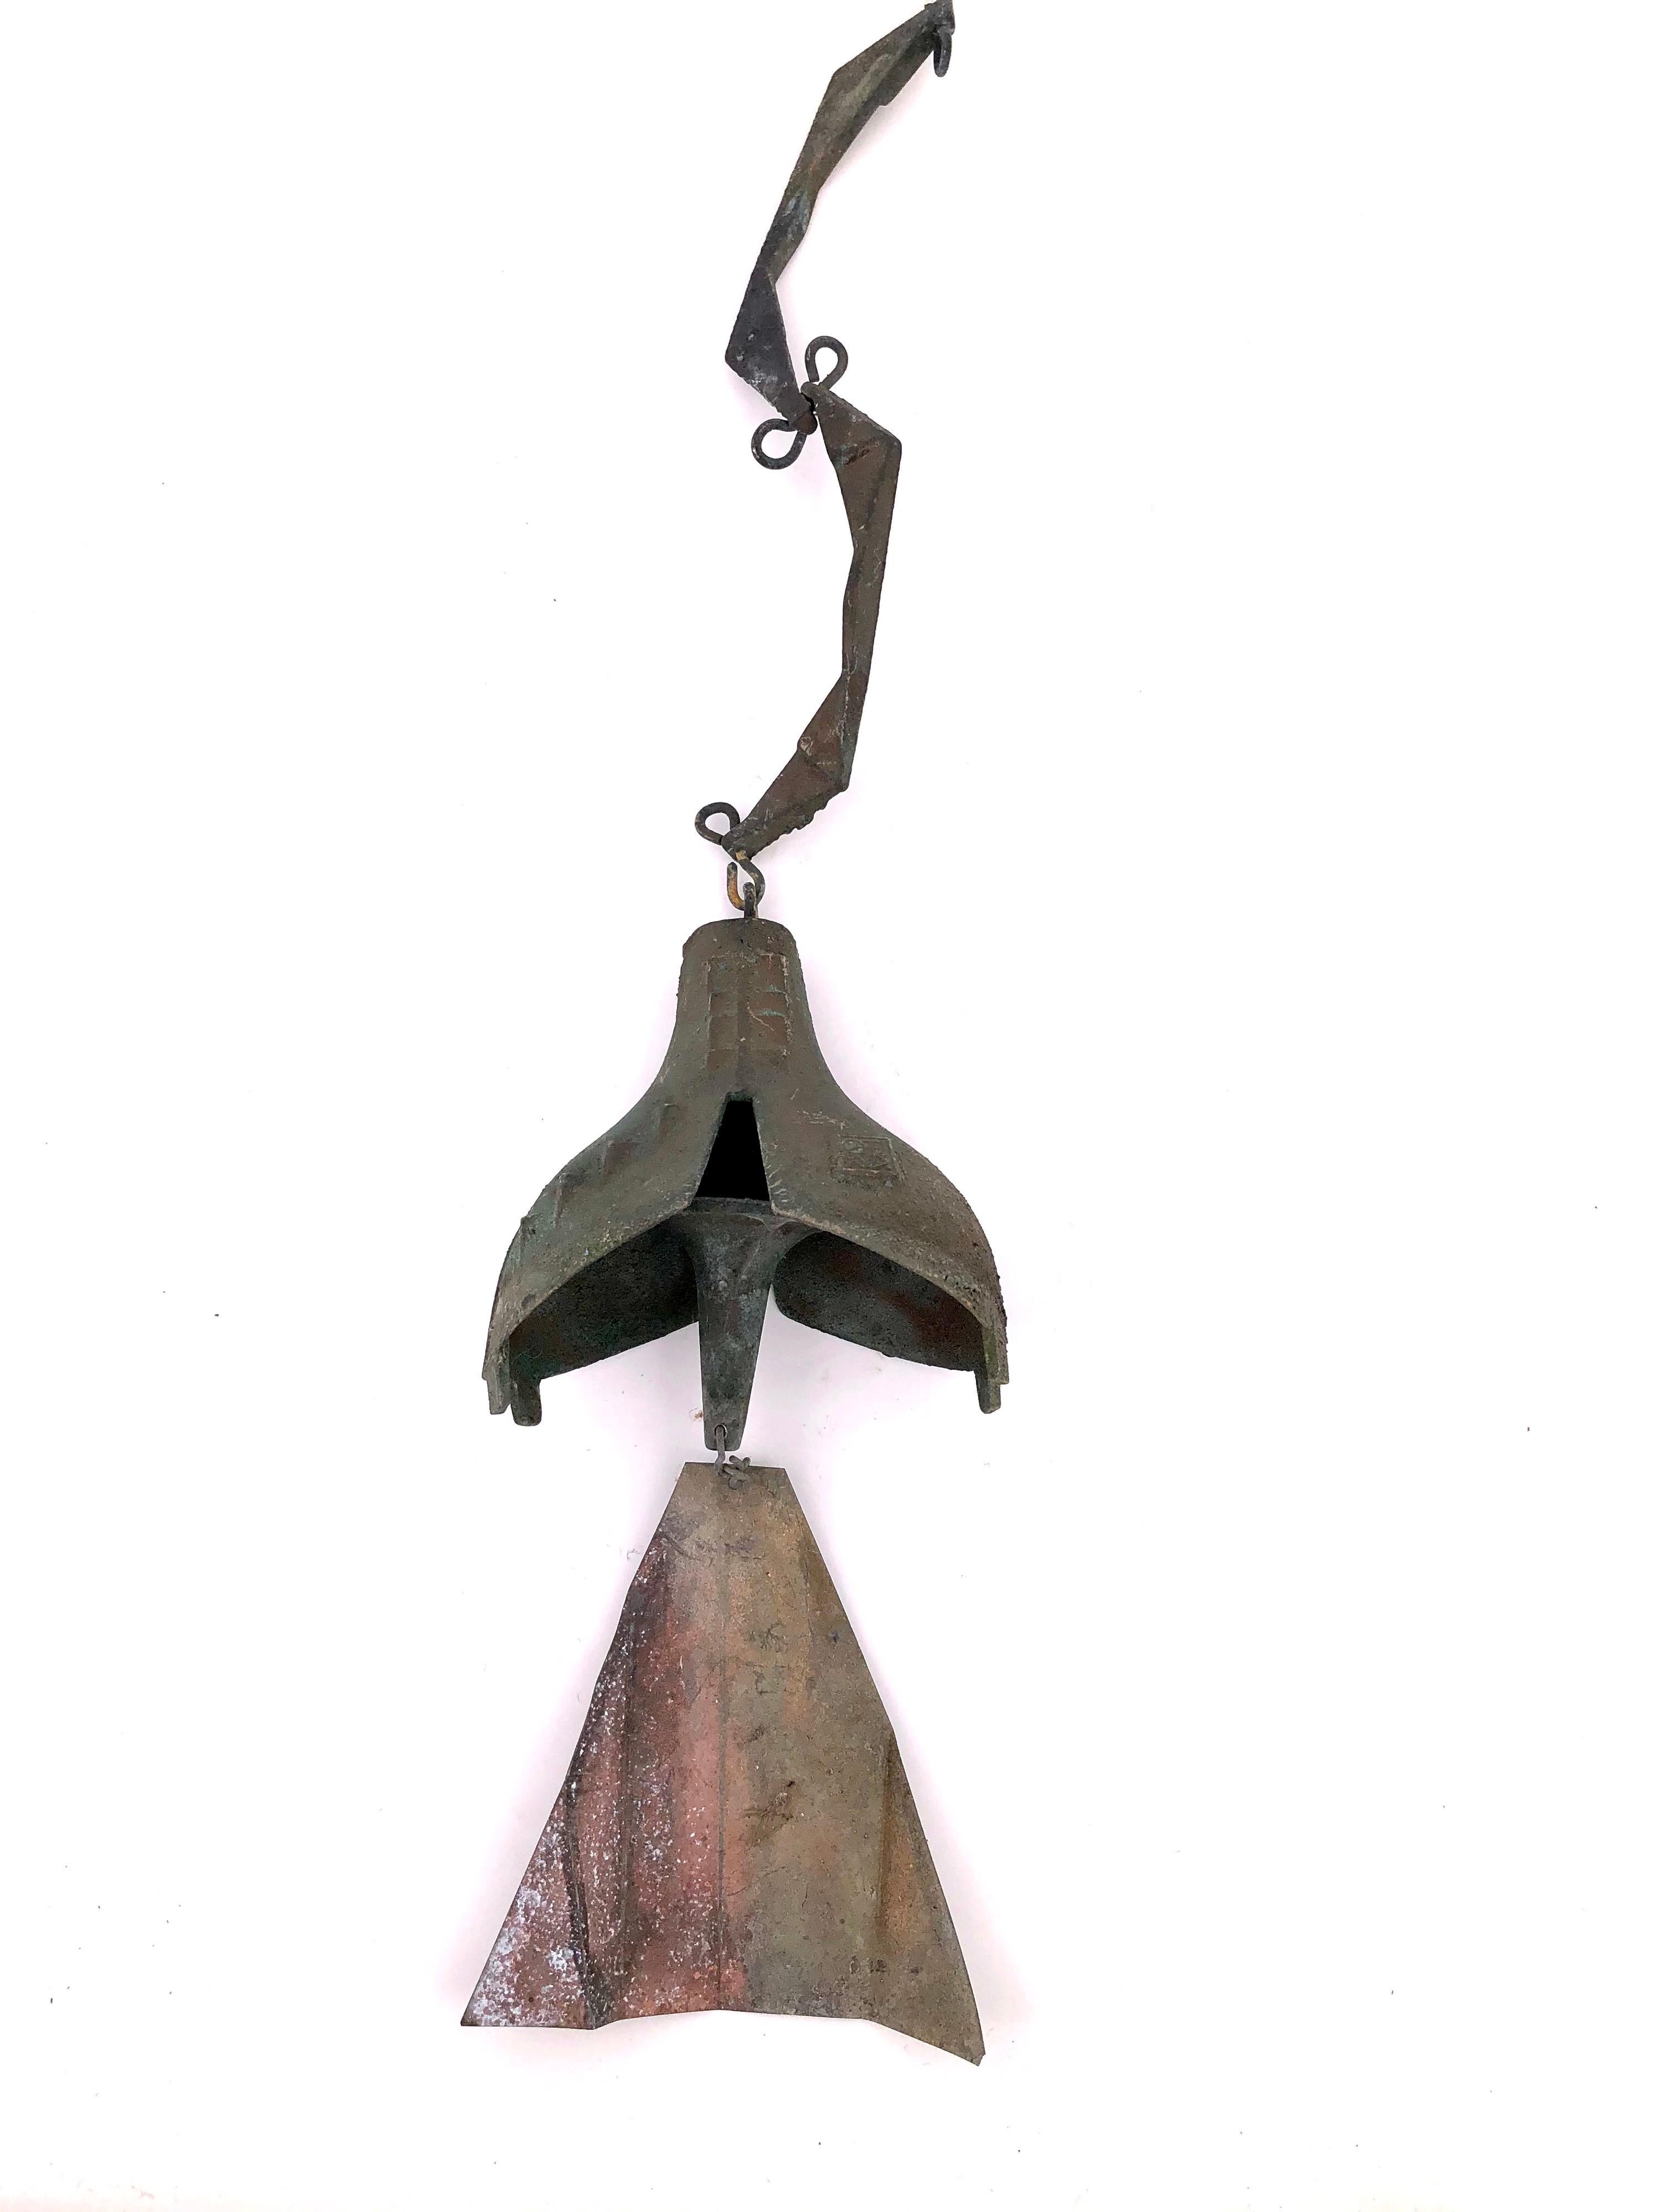 Striking Brutalist solid bronze bell by Paolo Soleri, circa 1970s. This iconic piece is 21